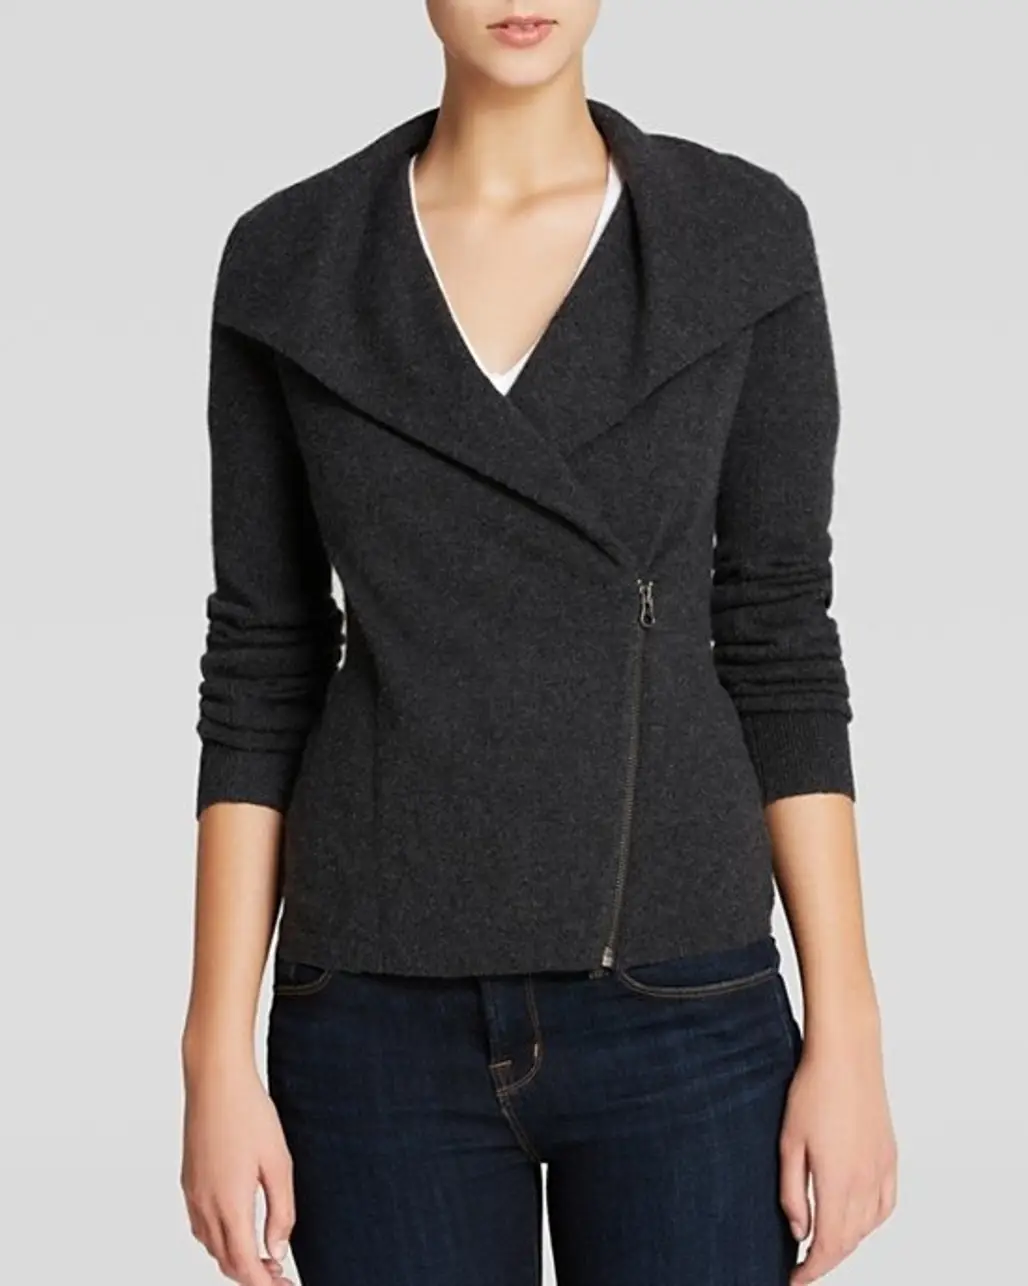 Moto Cashmere Jacket by C by Bloomingdale's